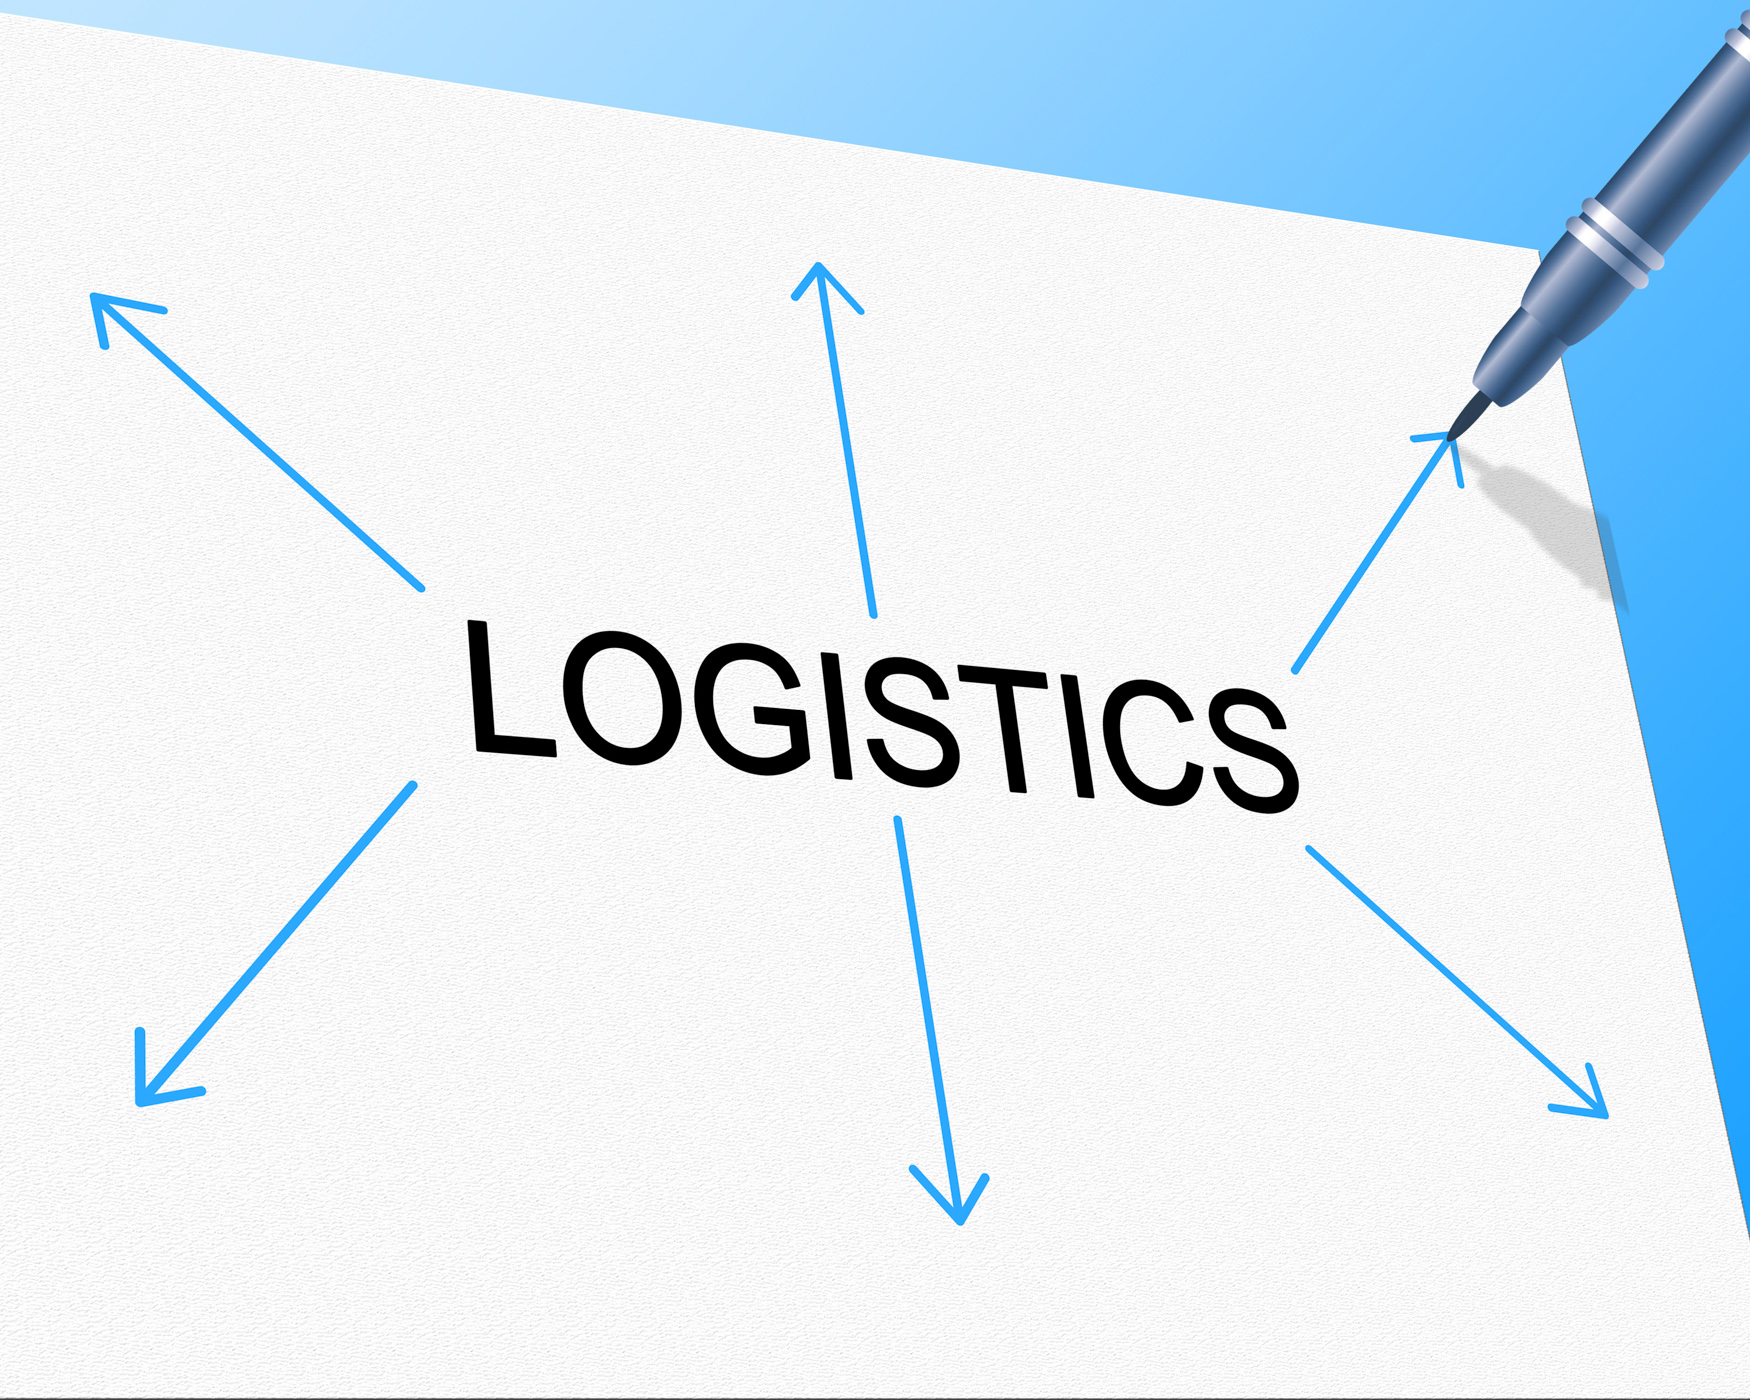 Logistics distribution shows supply chain and delivery photo